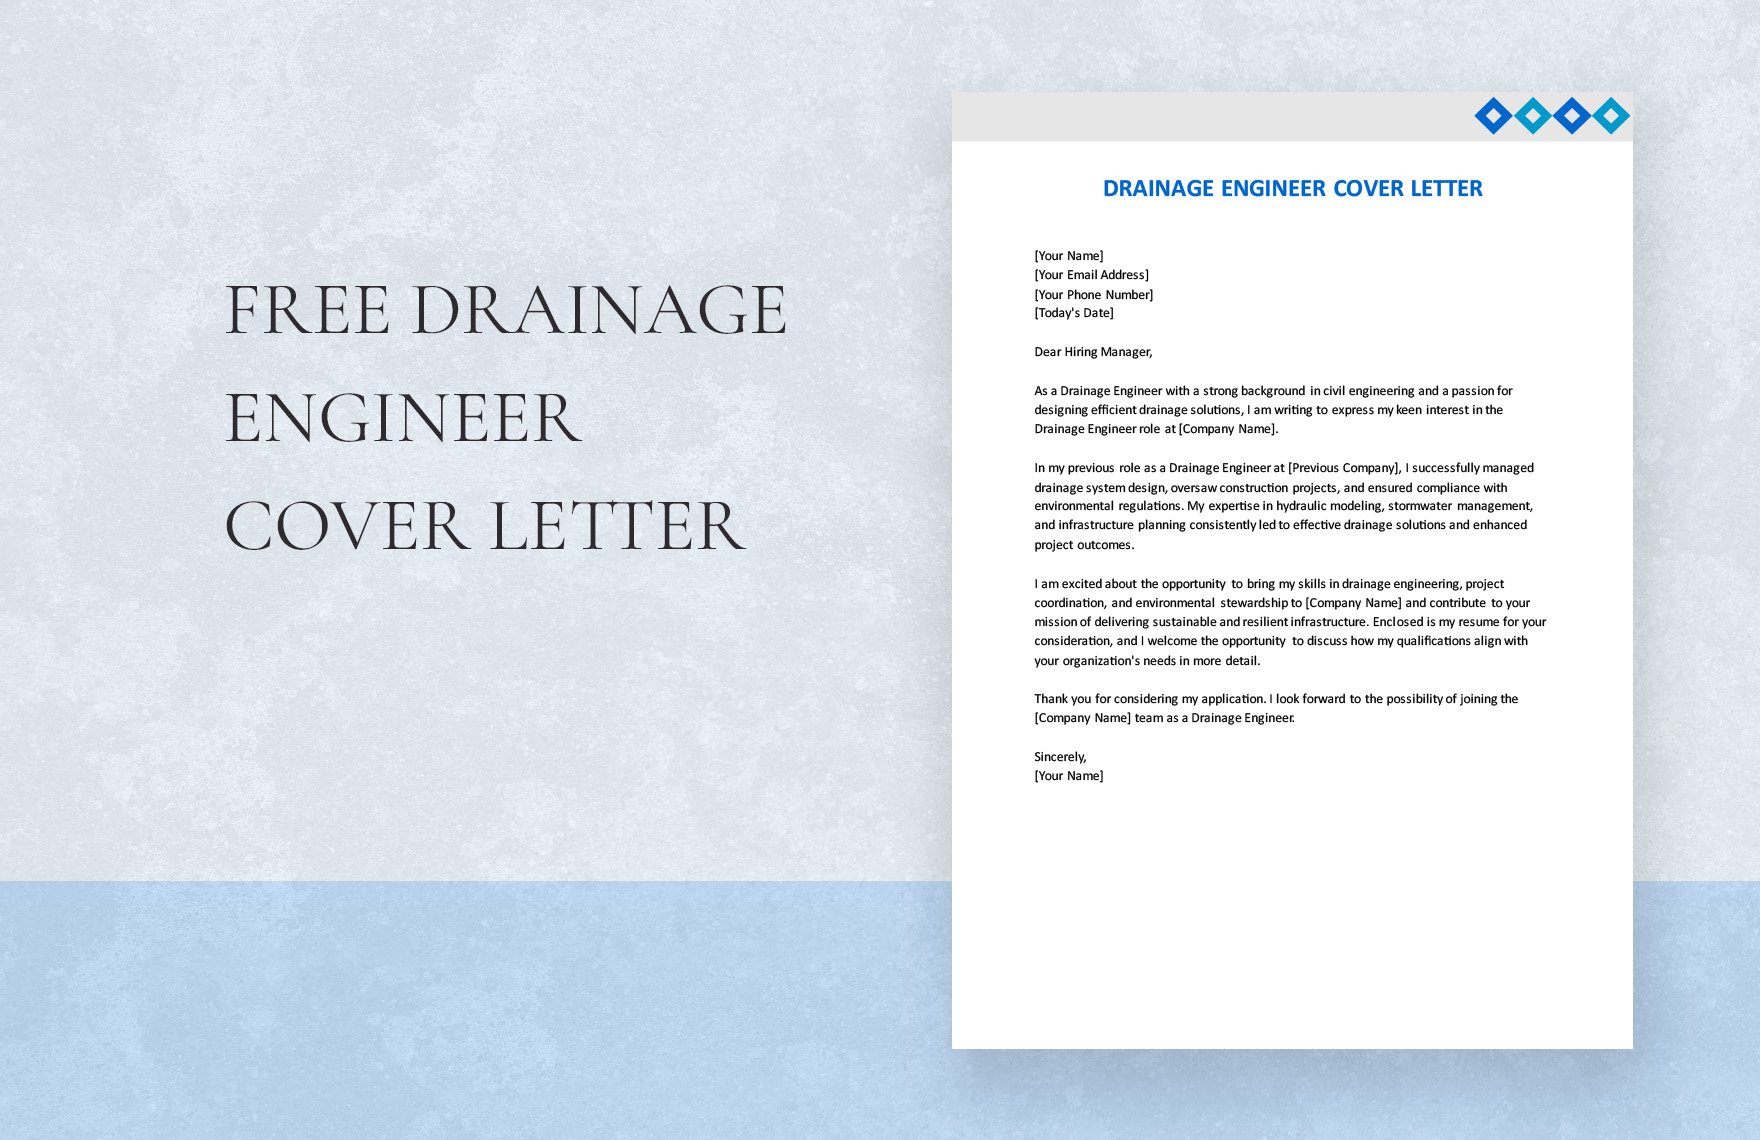 Drainage Engineer Cover Letter